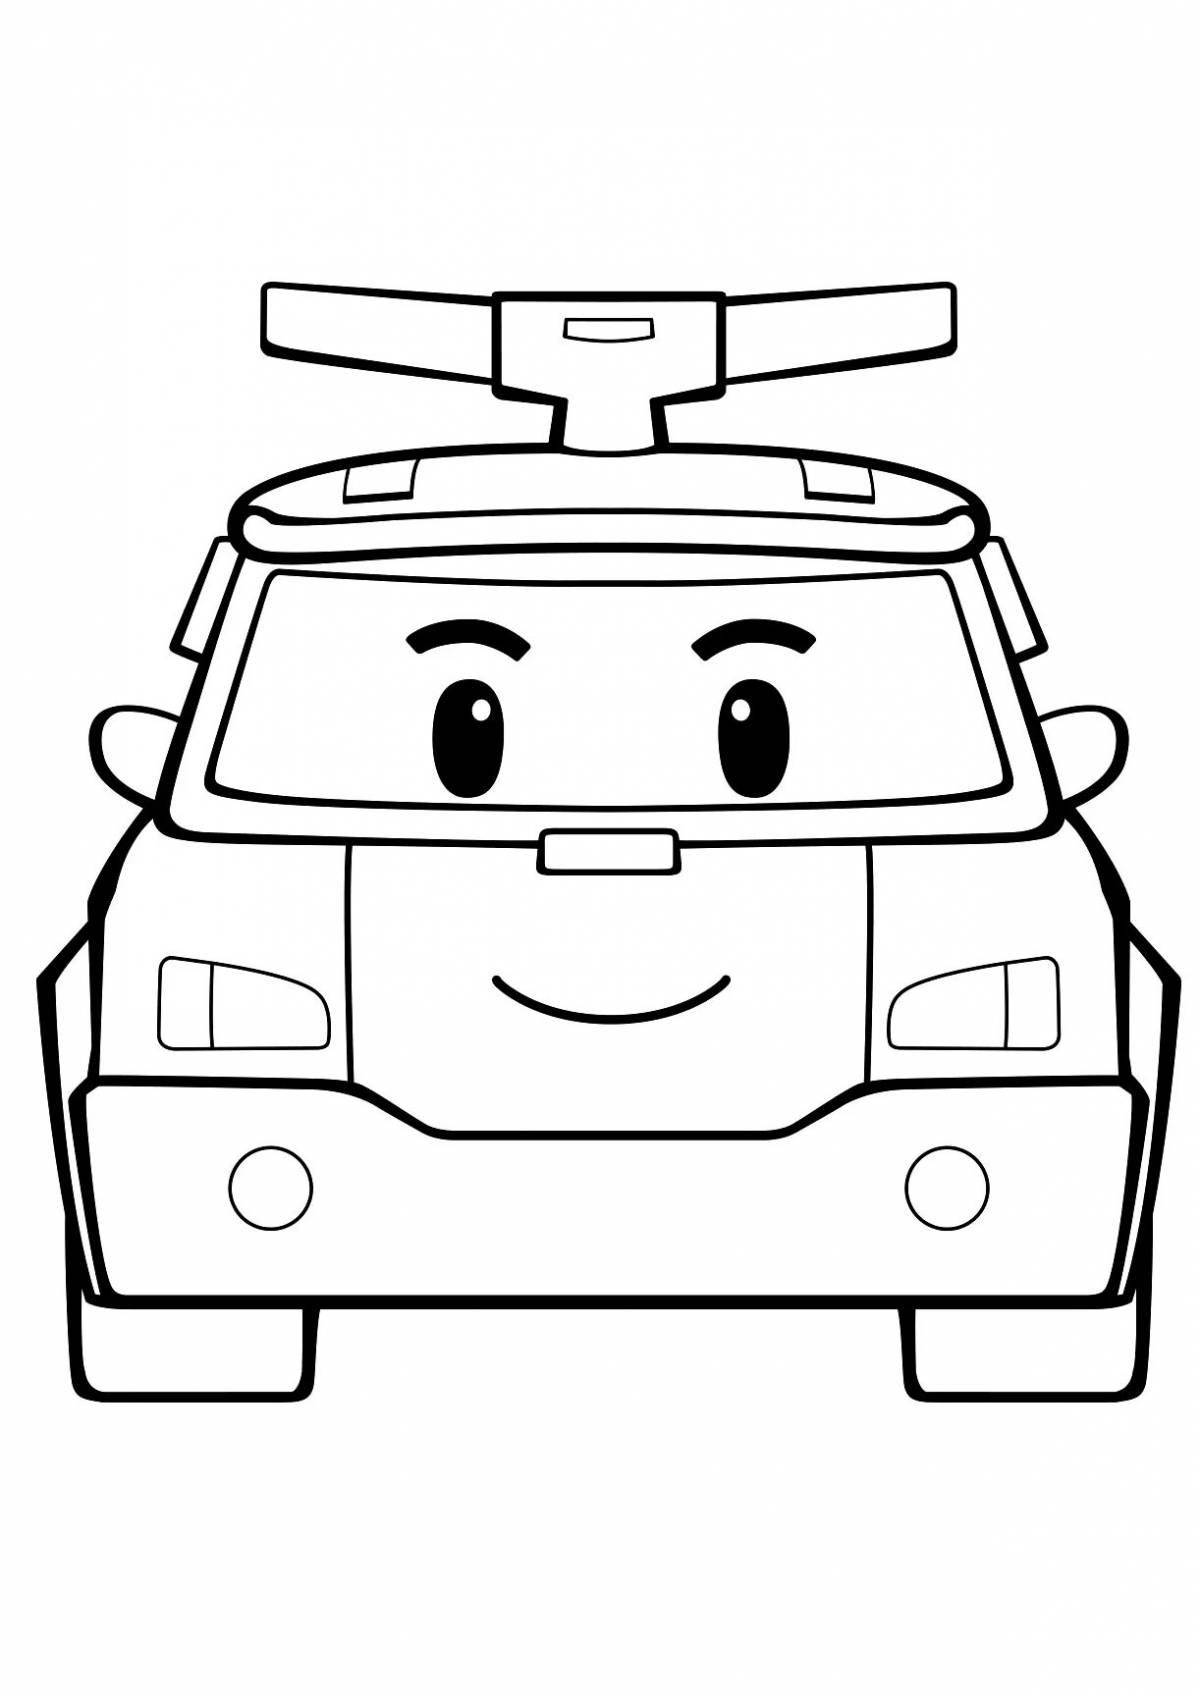 Coloring page playful robocar poly and his friends